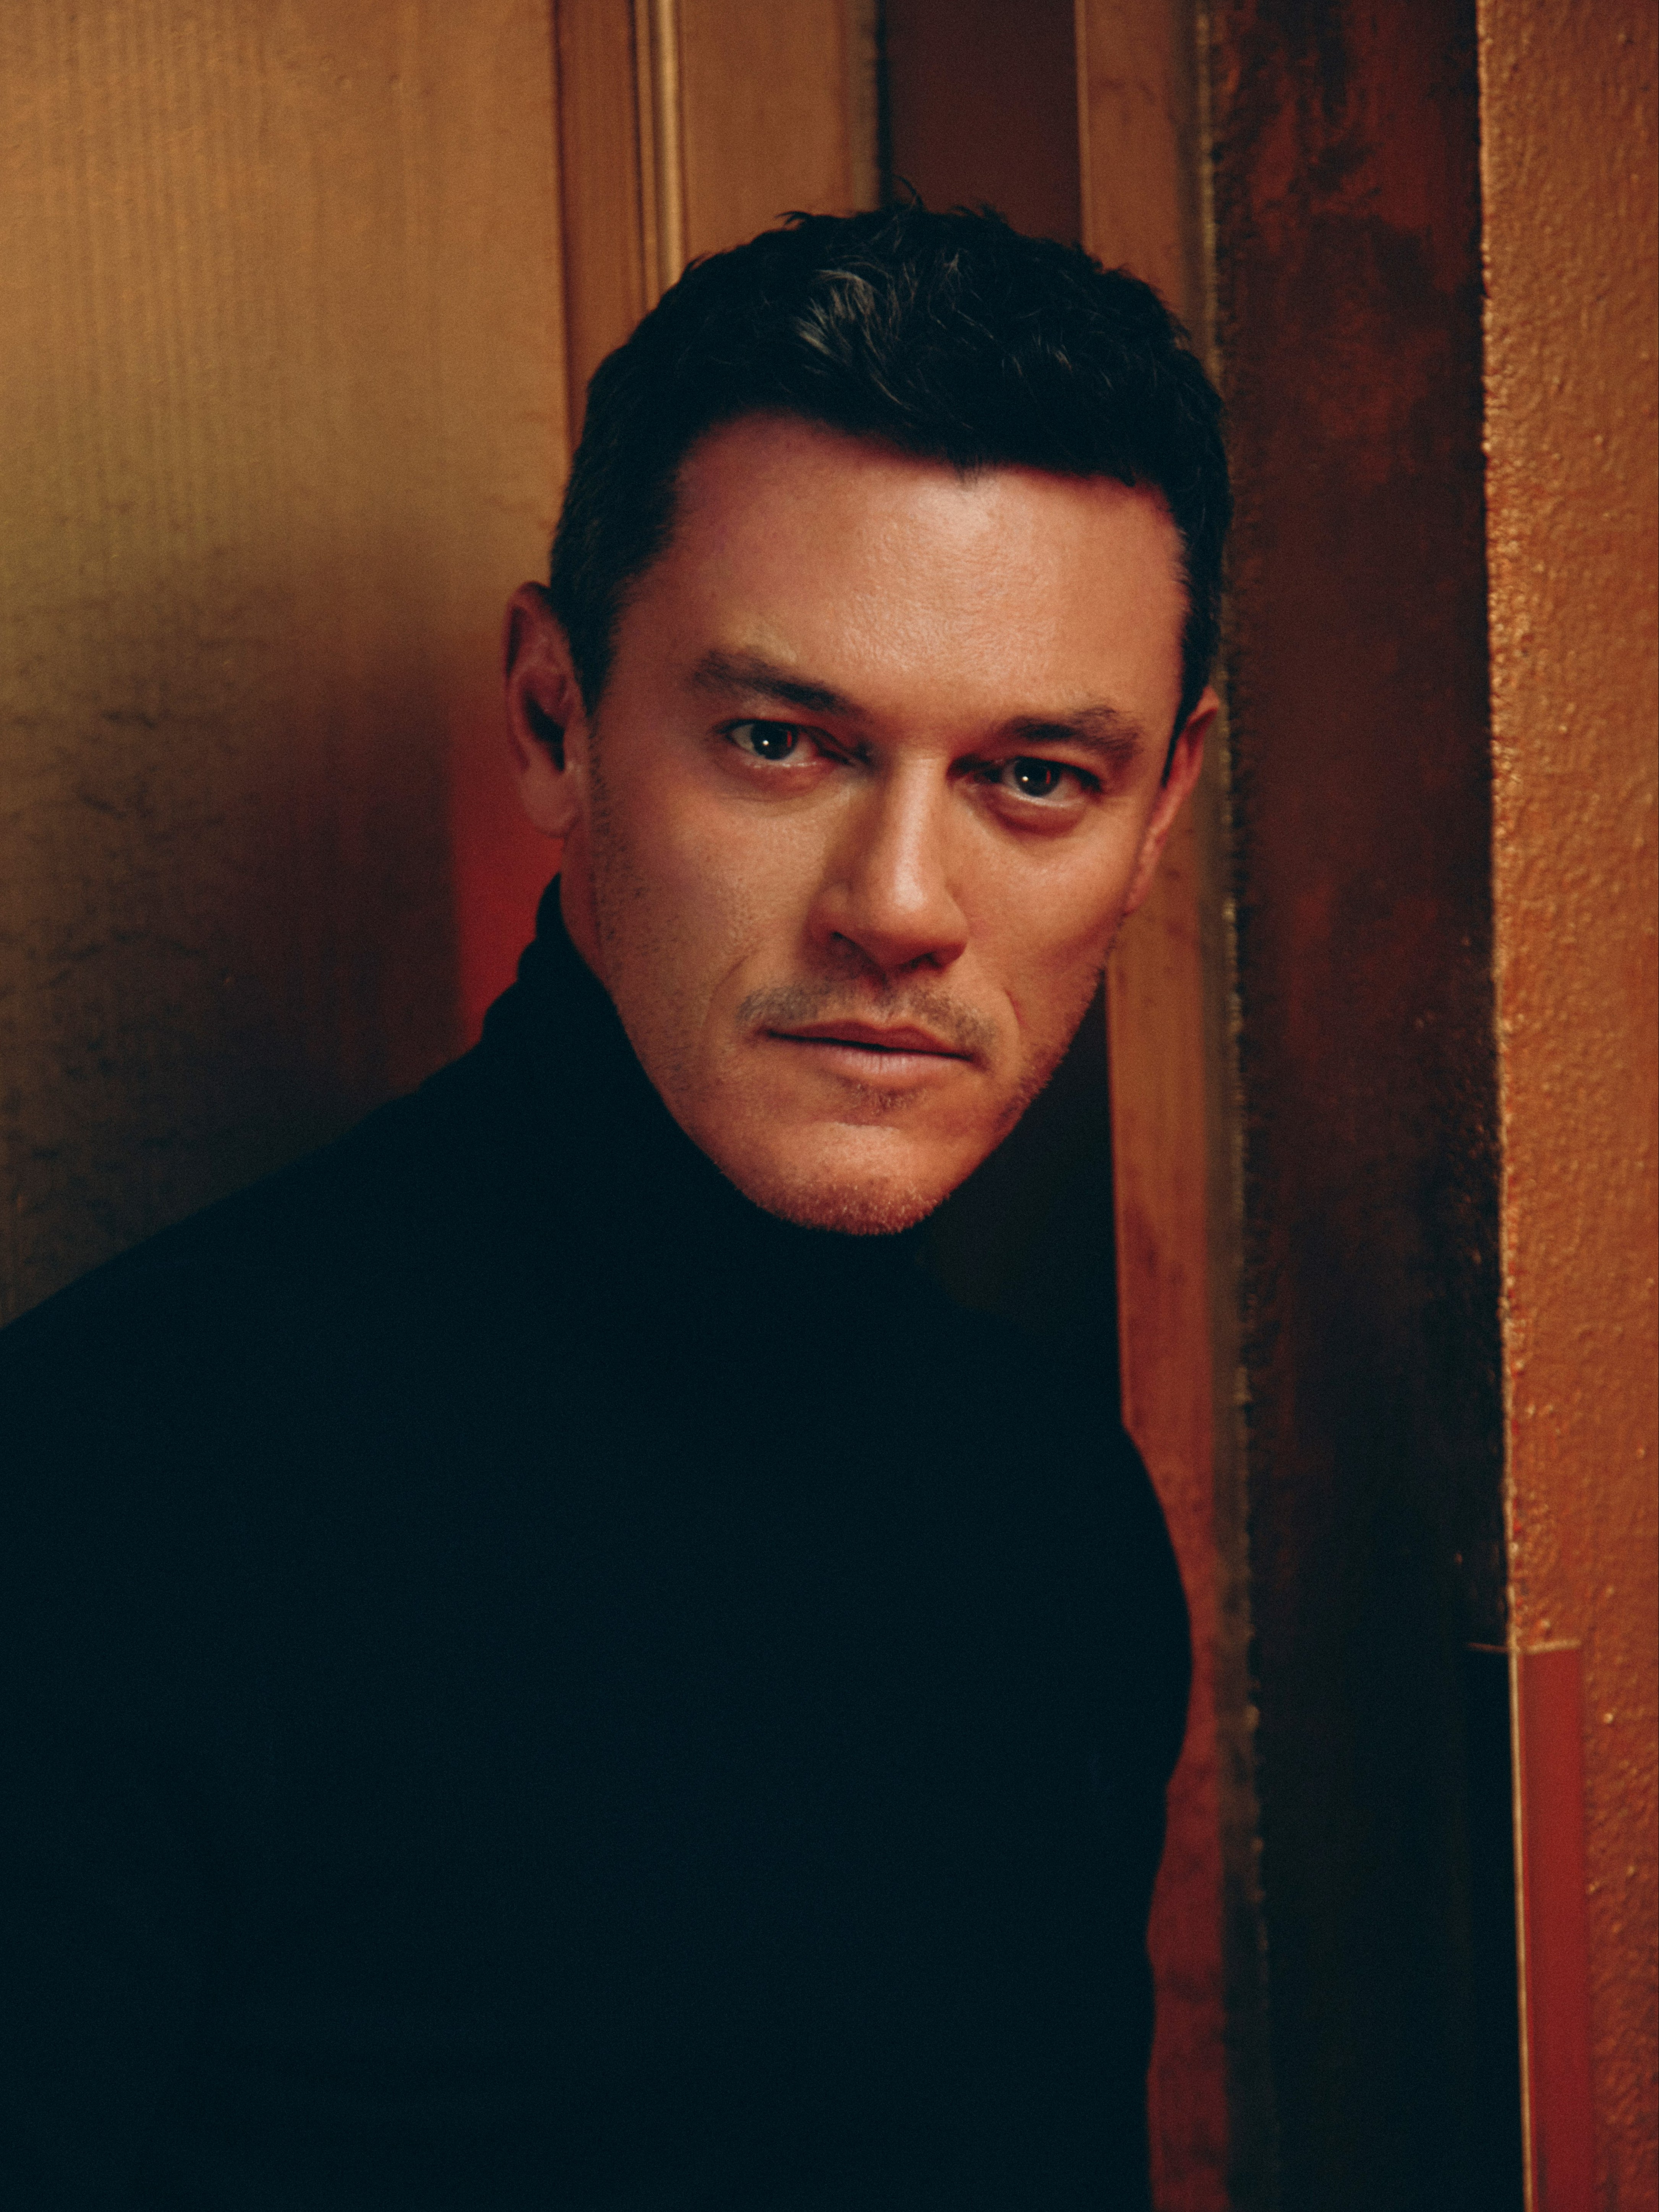 Luke Evans: ‘I like that feeling that there’s something bigger than us, when two people meet’